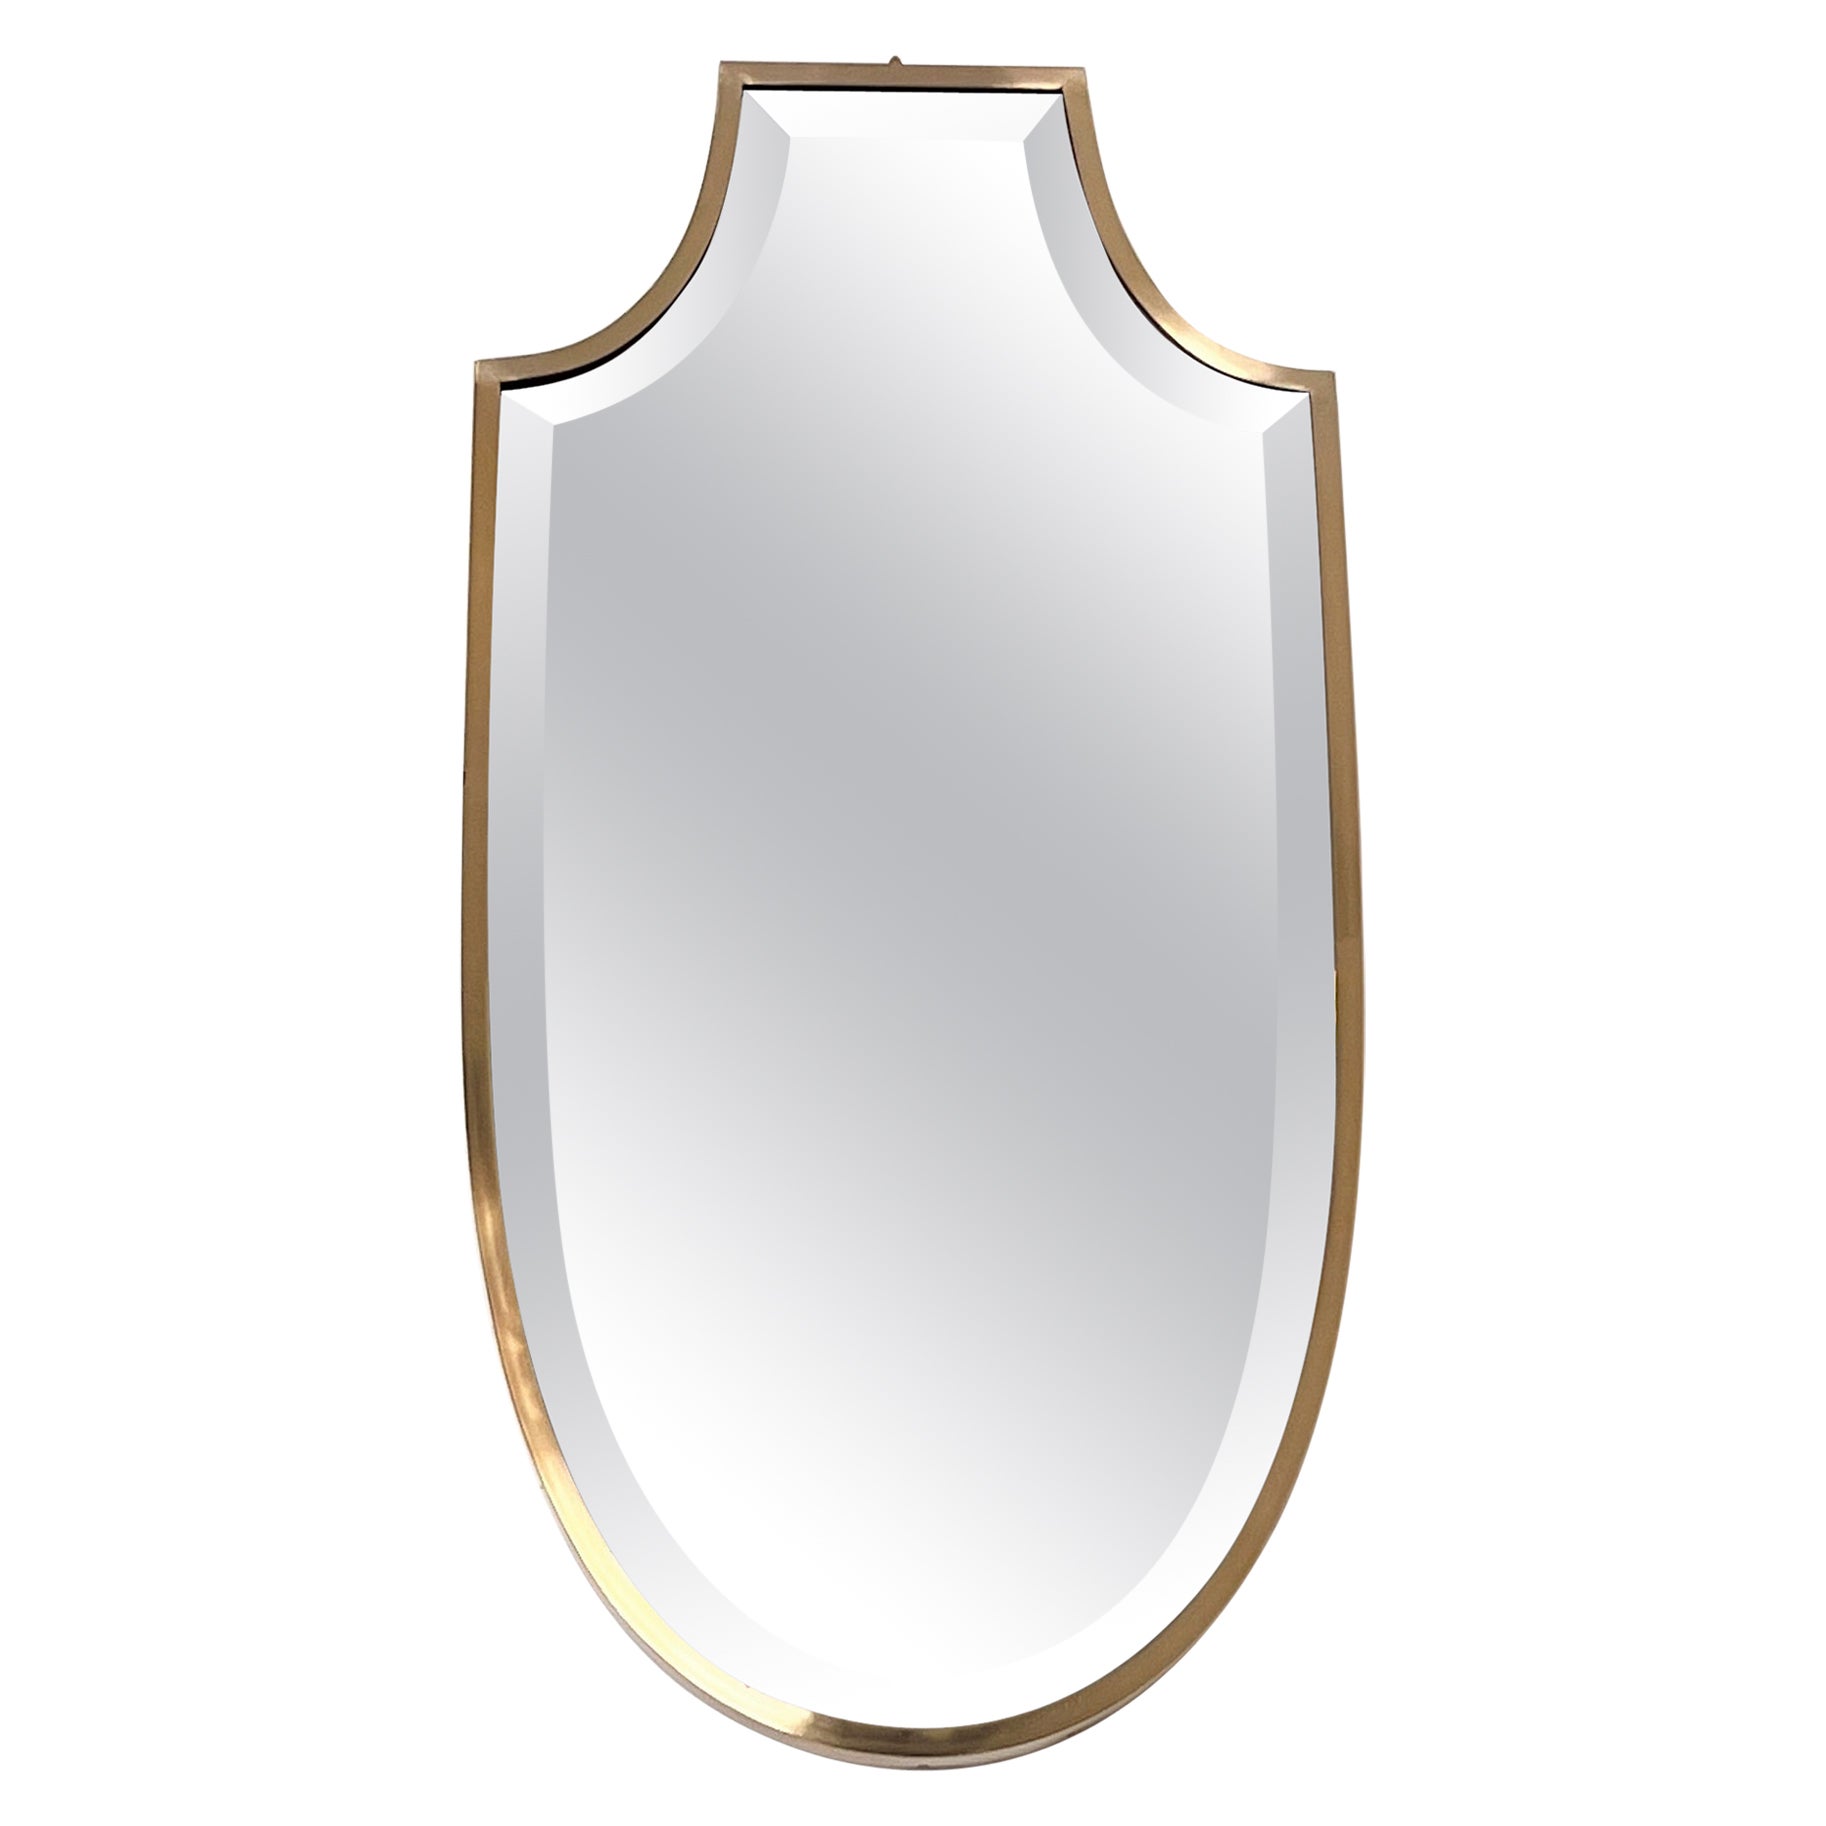 Italian MidCentury Shield Wall Mirror with Cut Glass and Thick Brass Frame, 1970